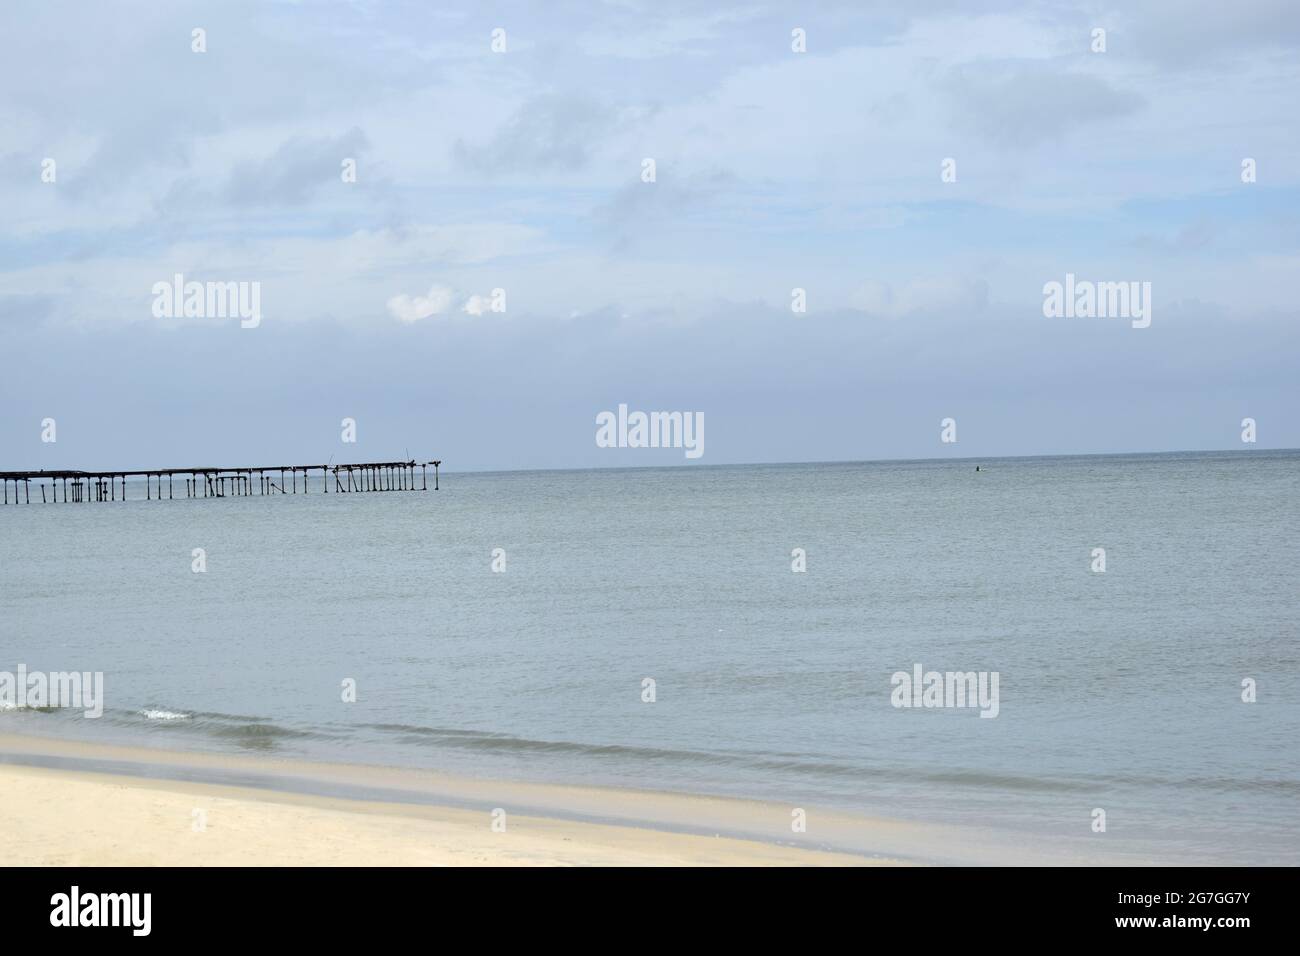 Wooden structure at Alleppey Beach, Kerala, India Stock Photo